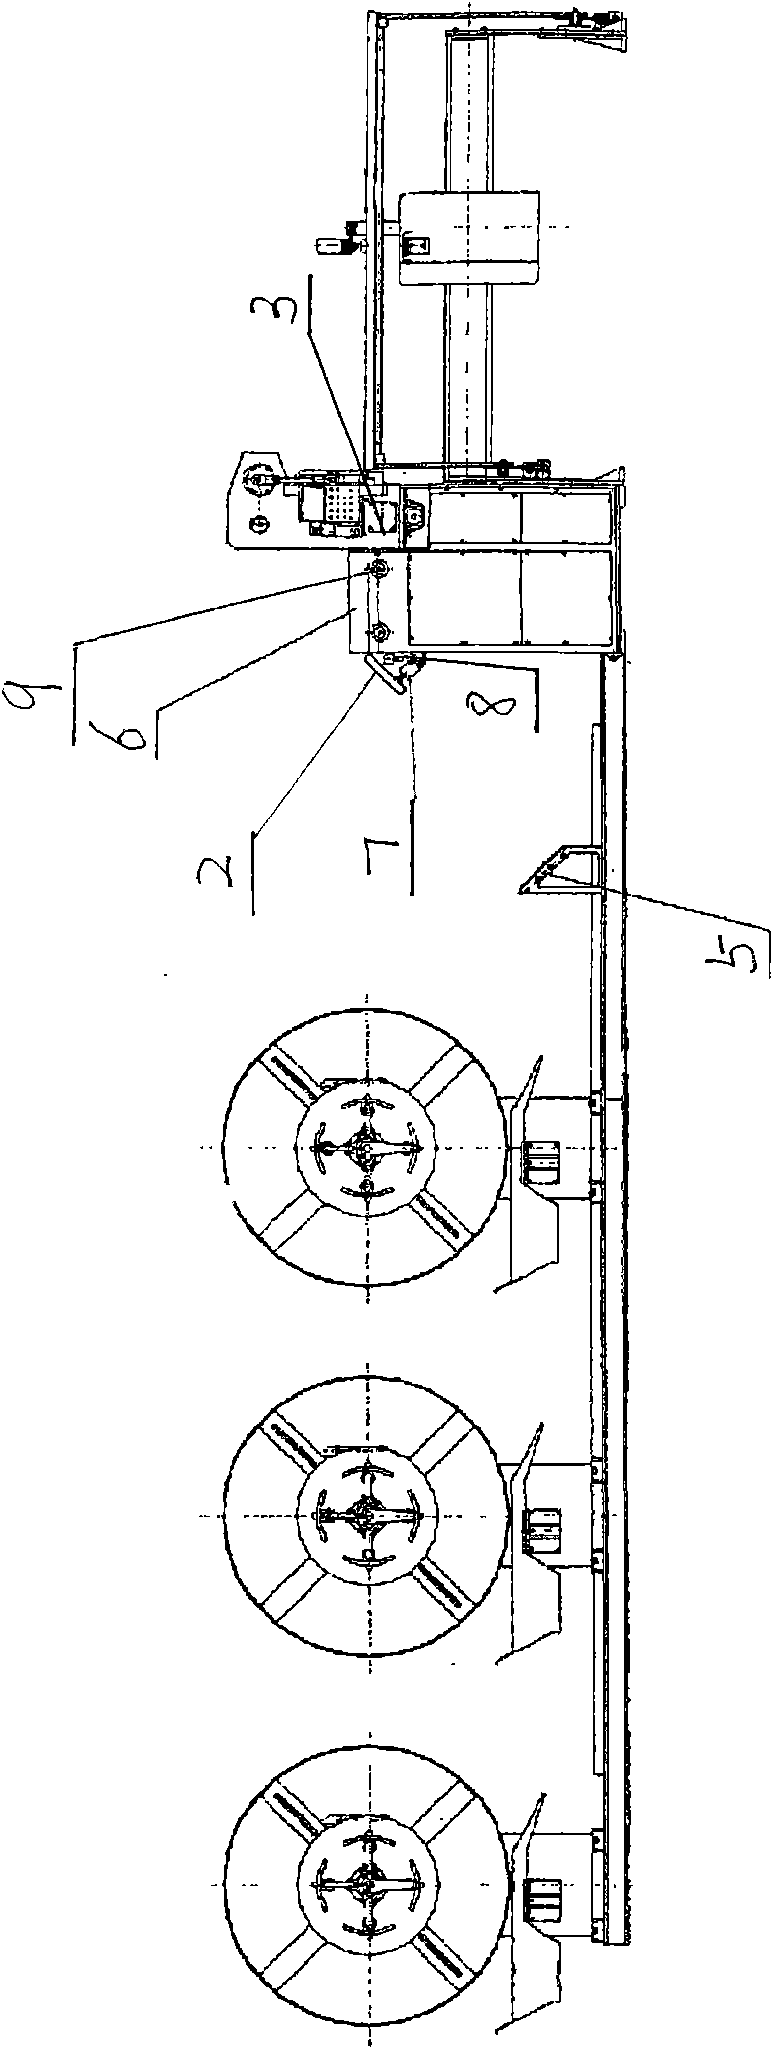 Feeding device for amorphous alloy ribbons